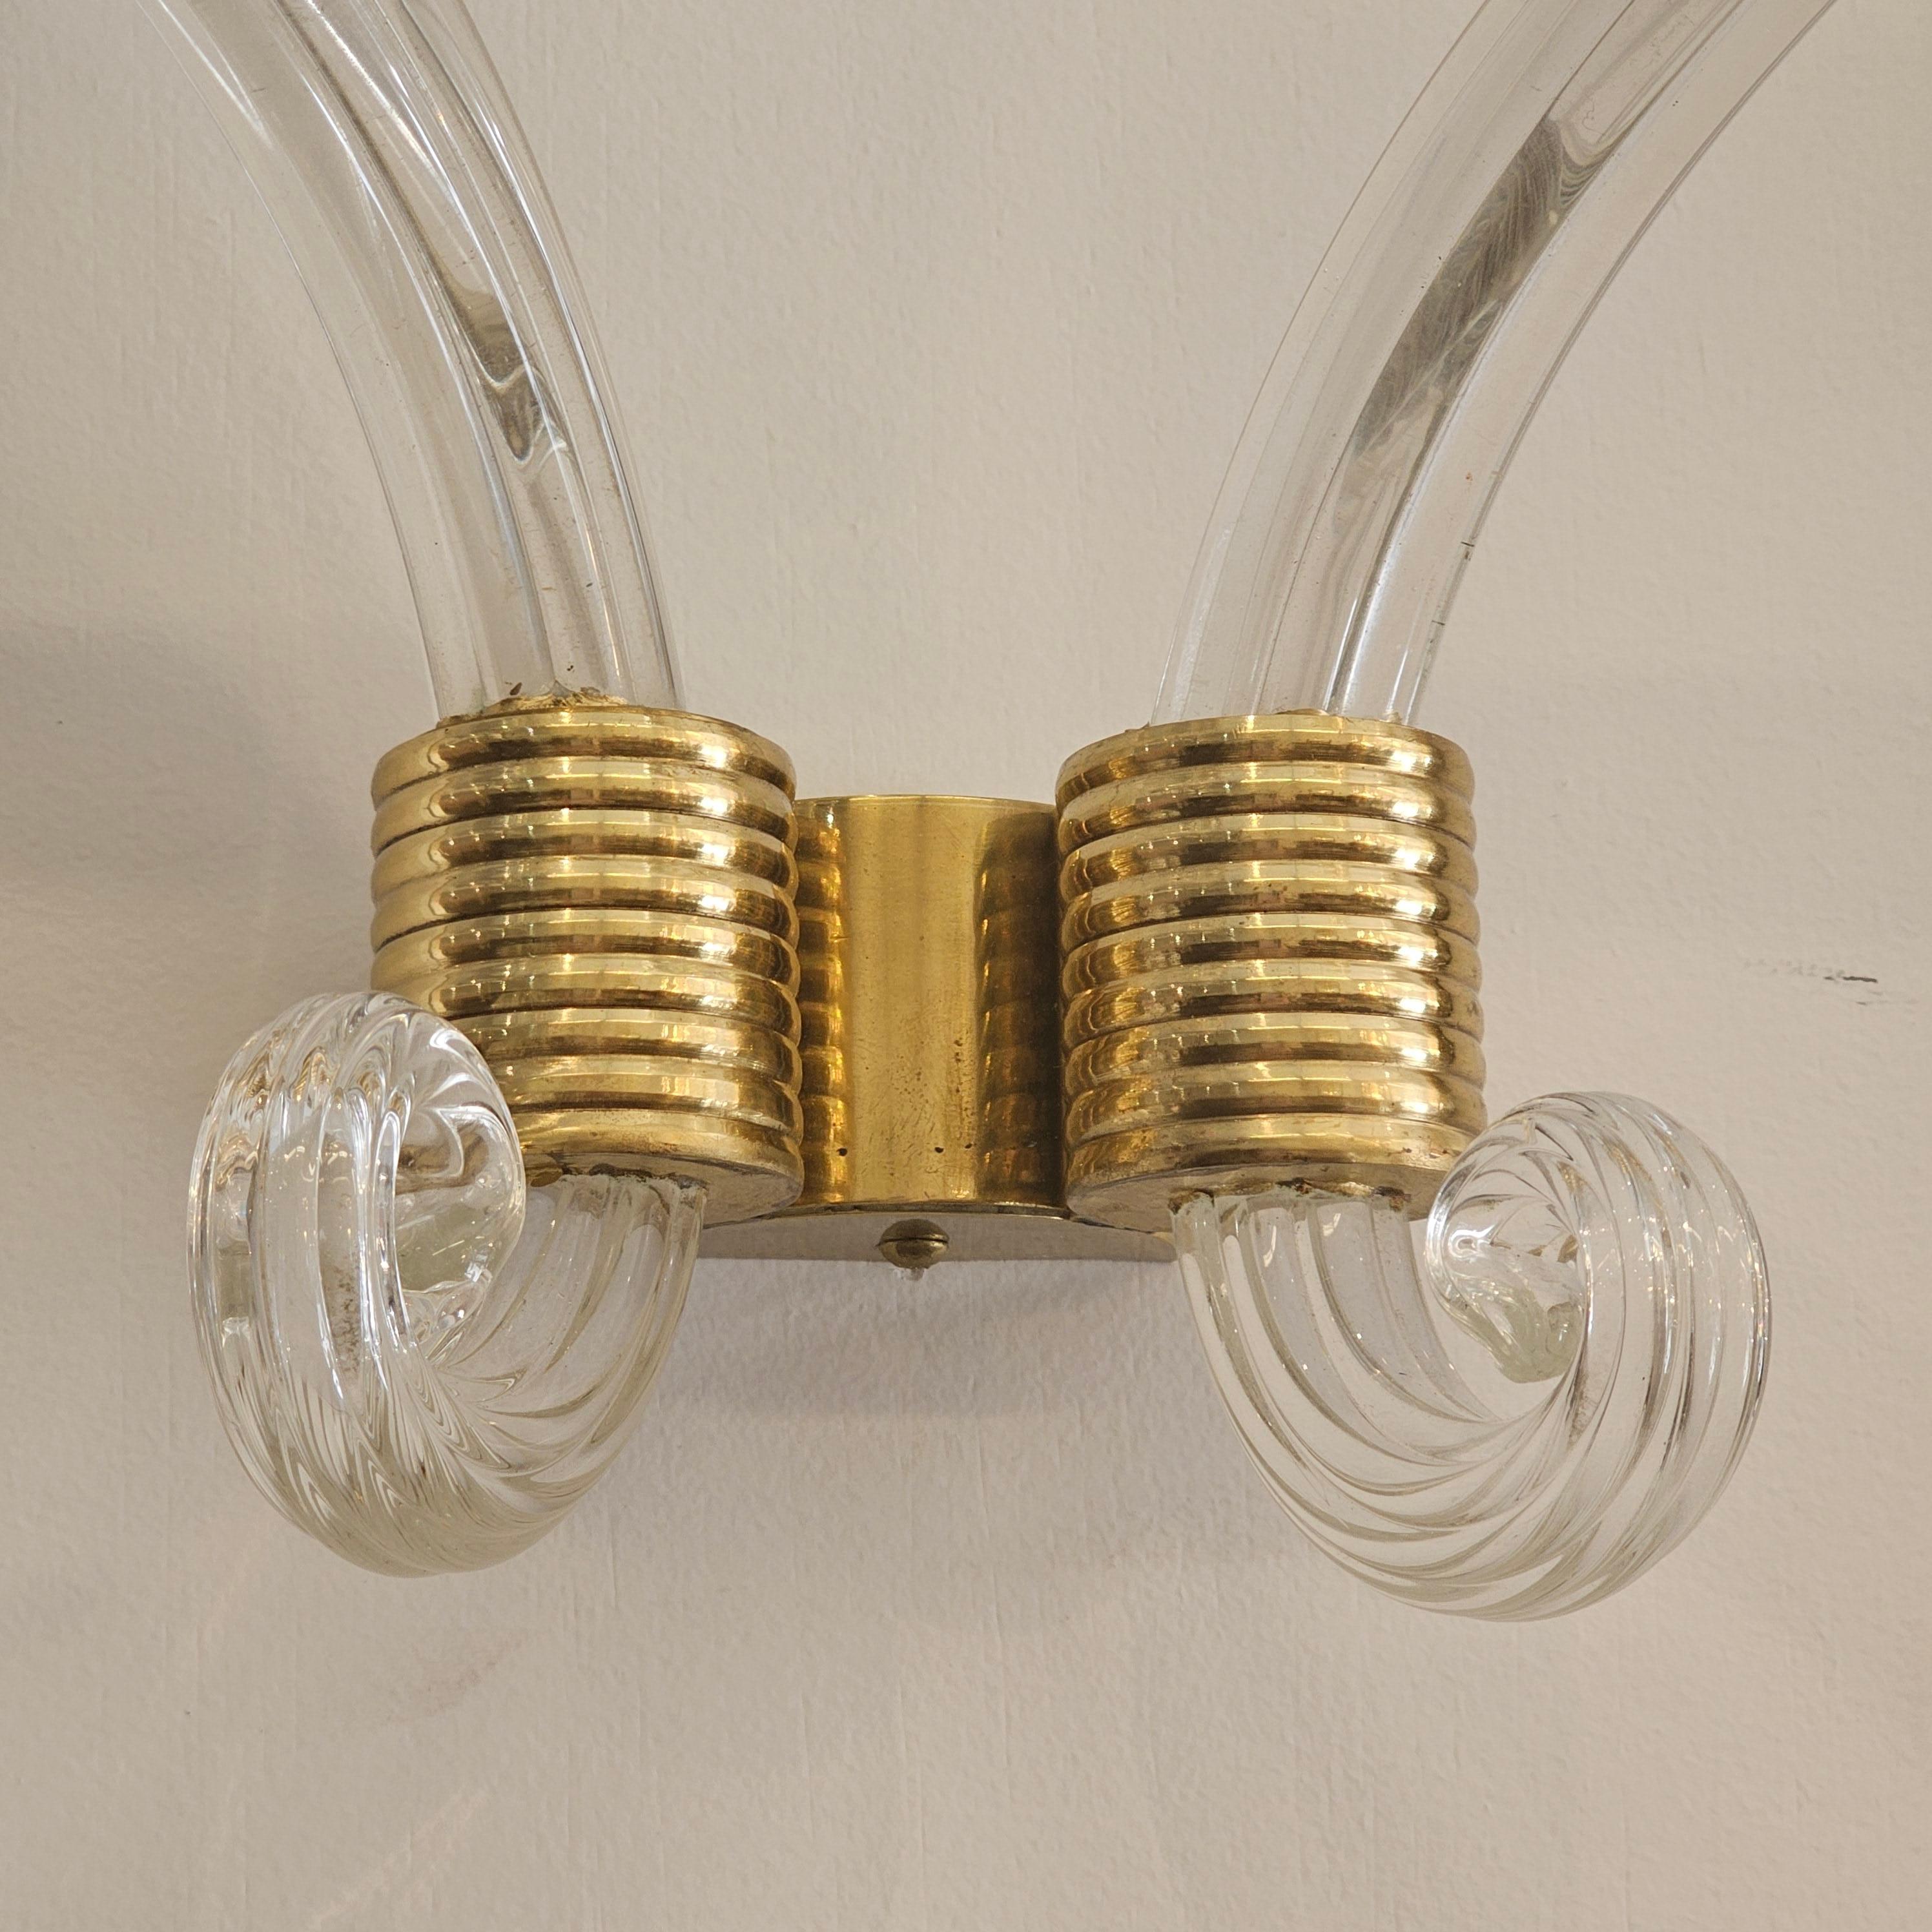 Pair of 1940s Murano Glass Tulip Cup Wall Sconces by Barovier & Toso For Sale 1